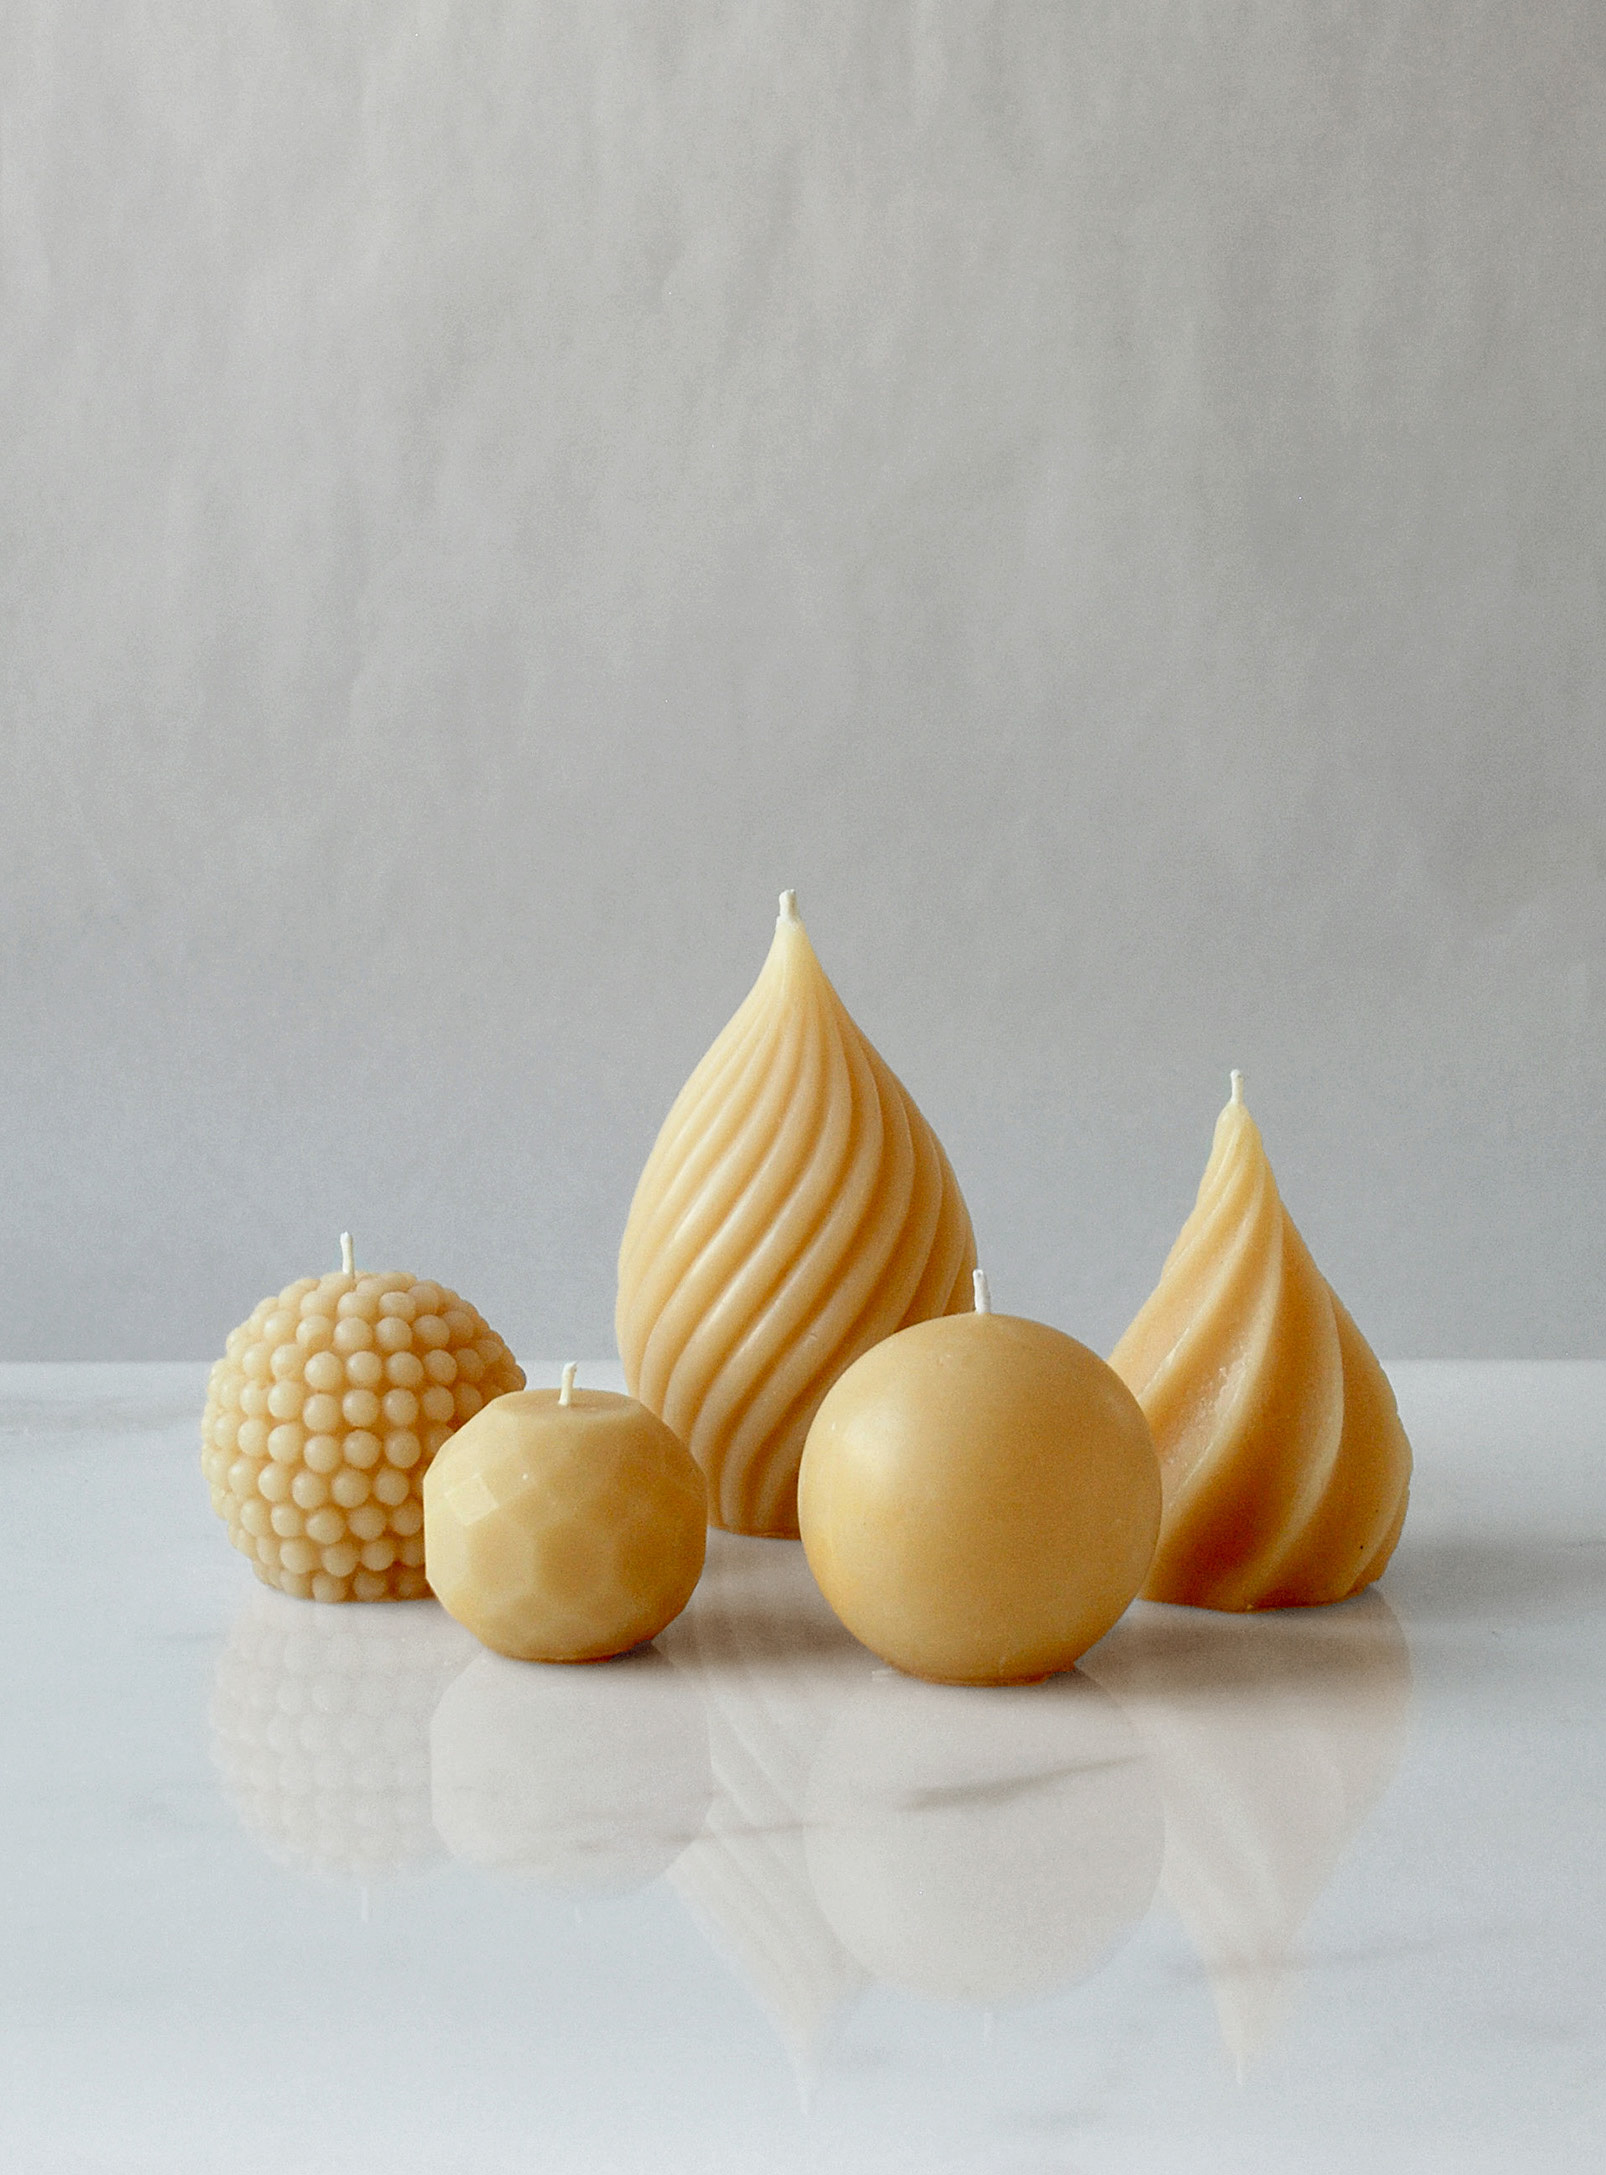 Barletta Beeswax - Beeswax whimsical gift Set  of 5 candles